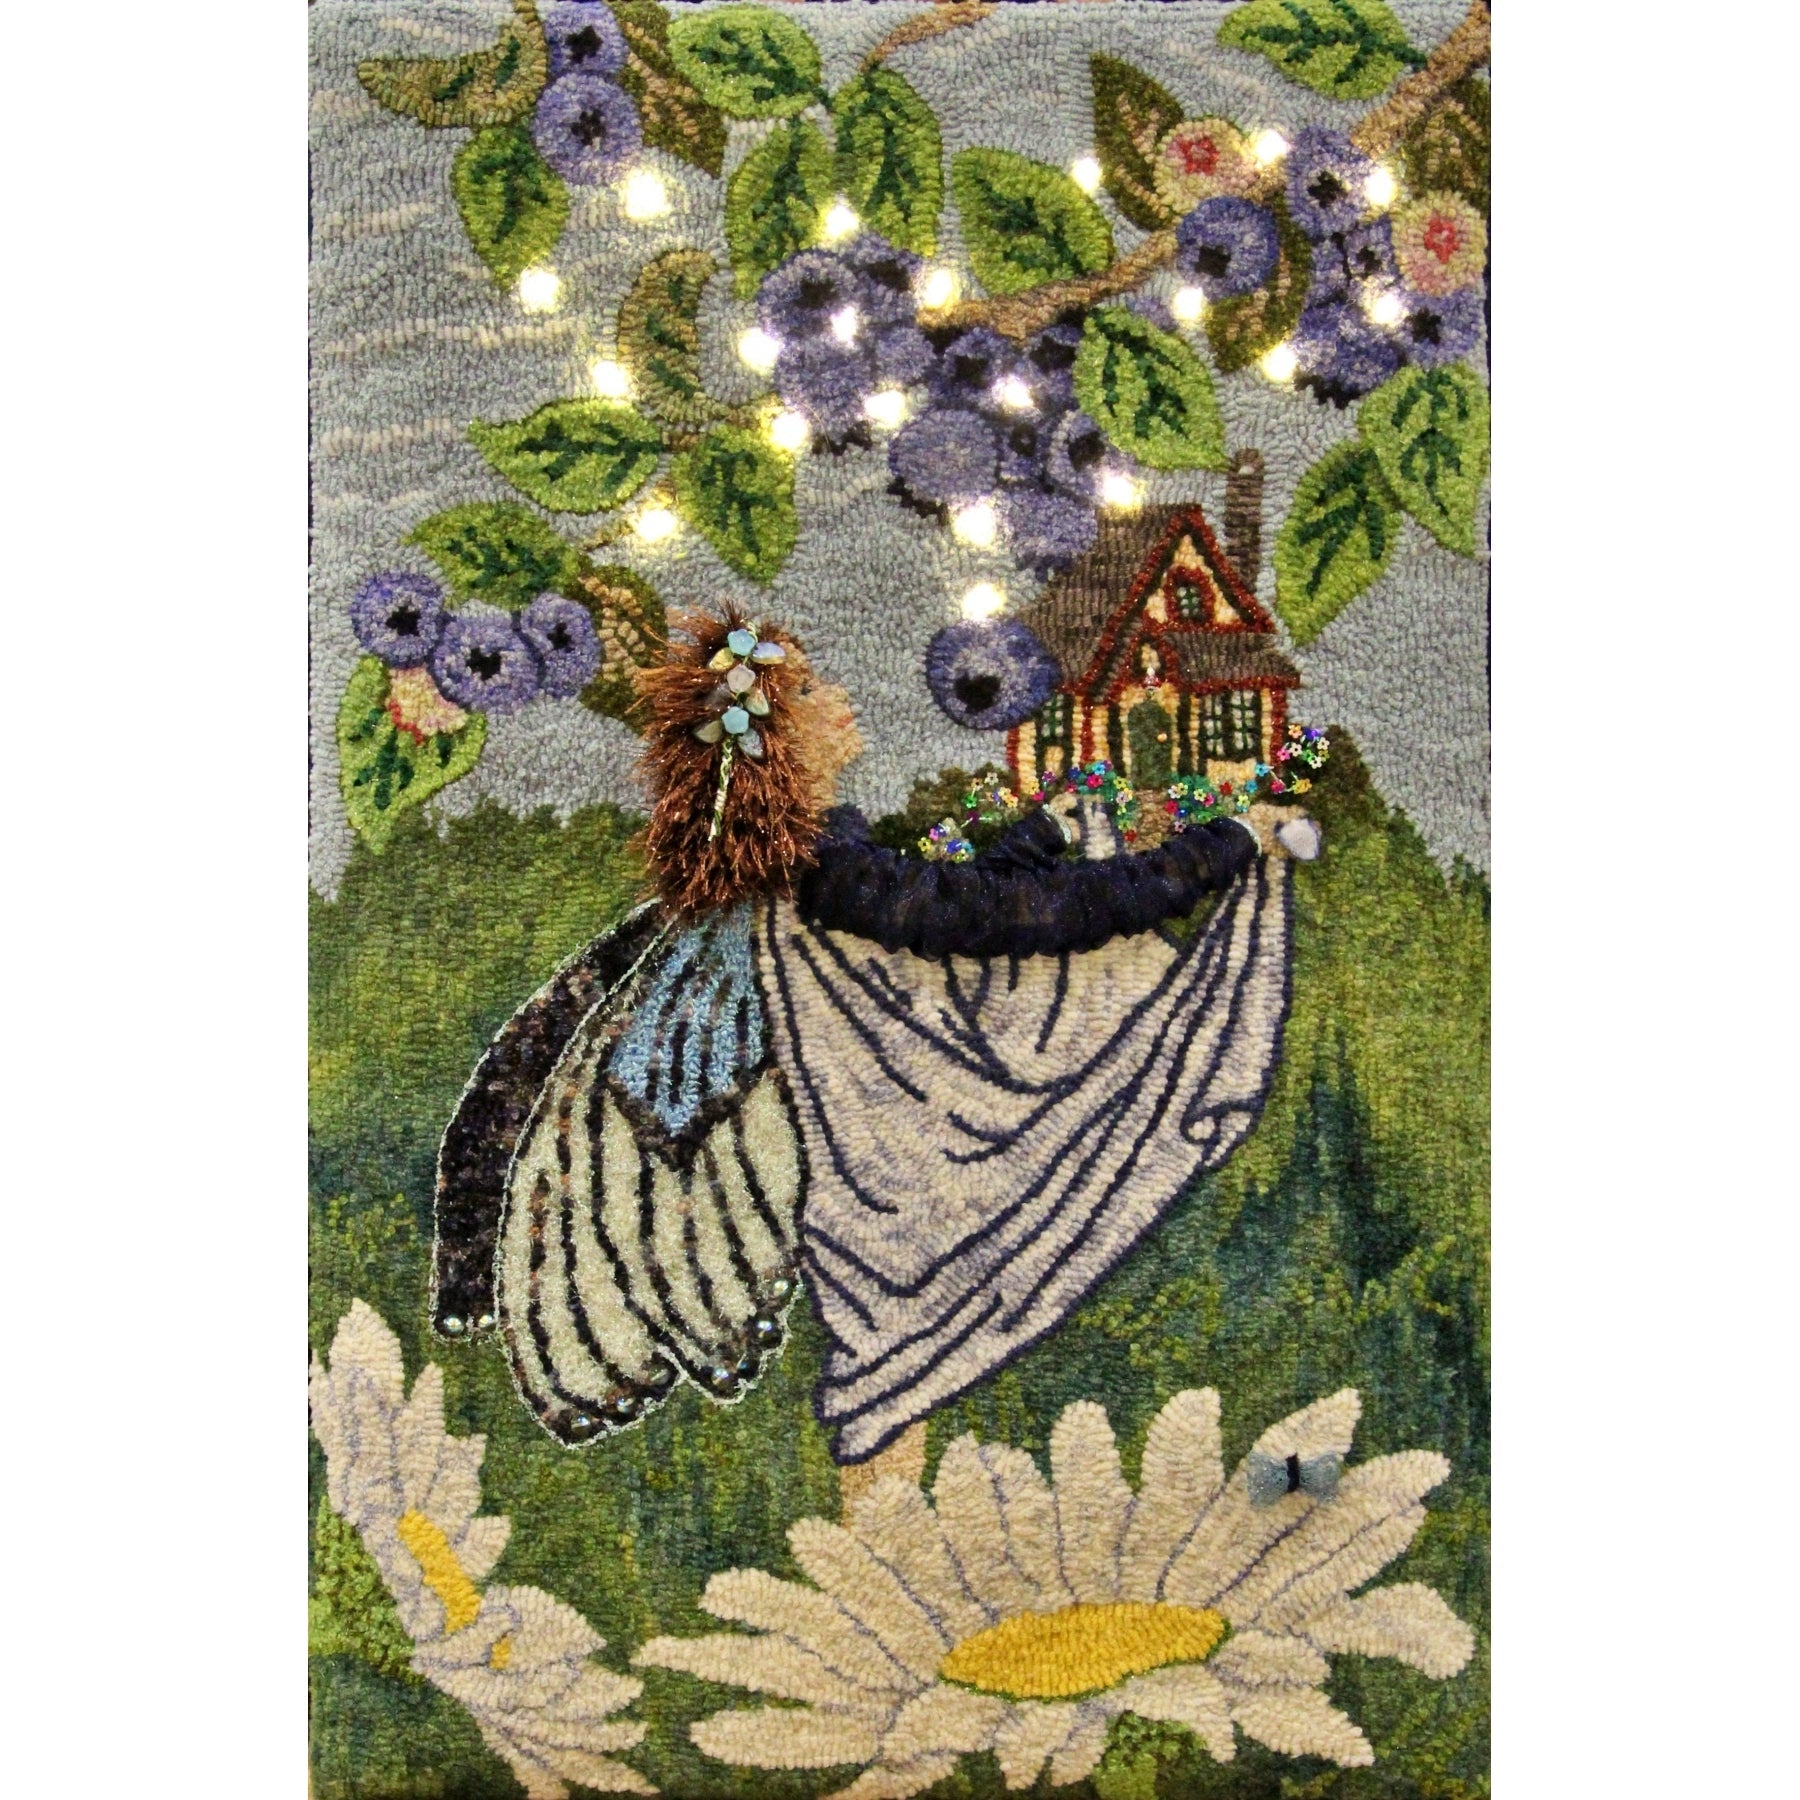 Blueberry Fairy, rug hooked by Cheryl Halliday